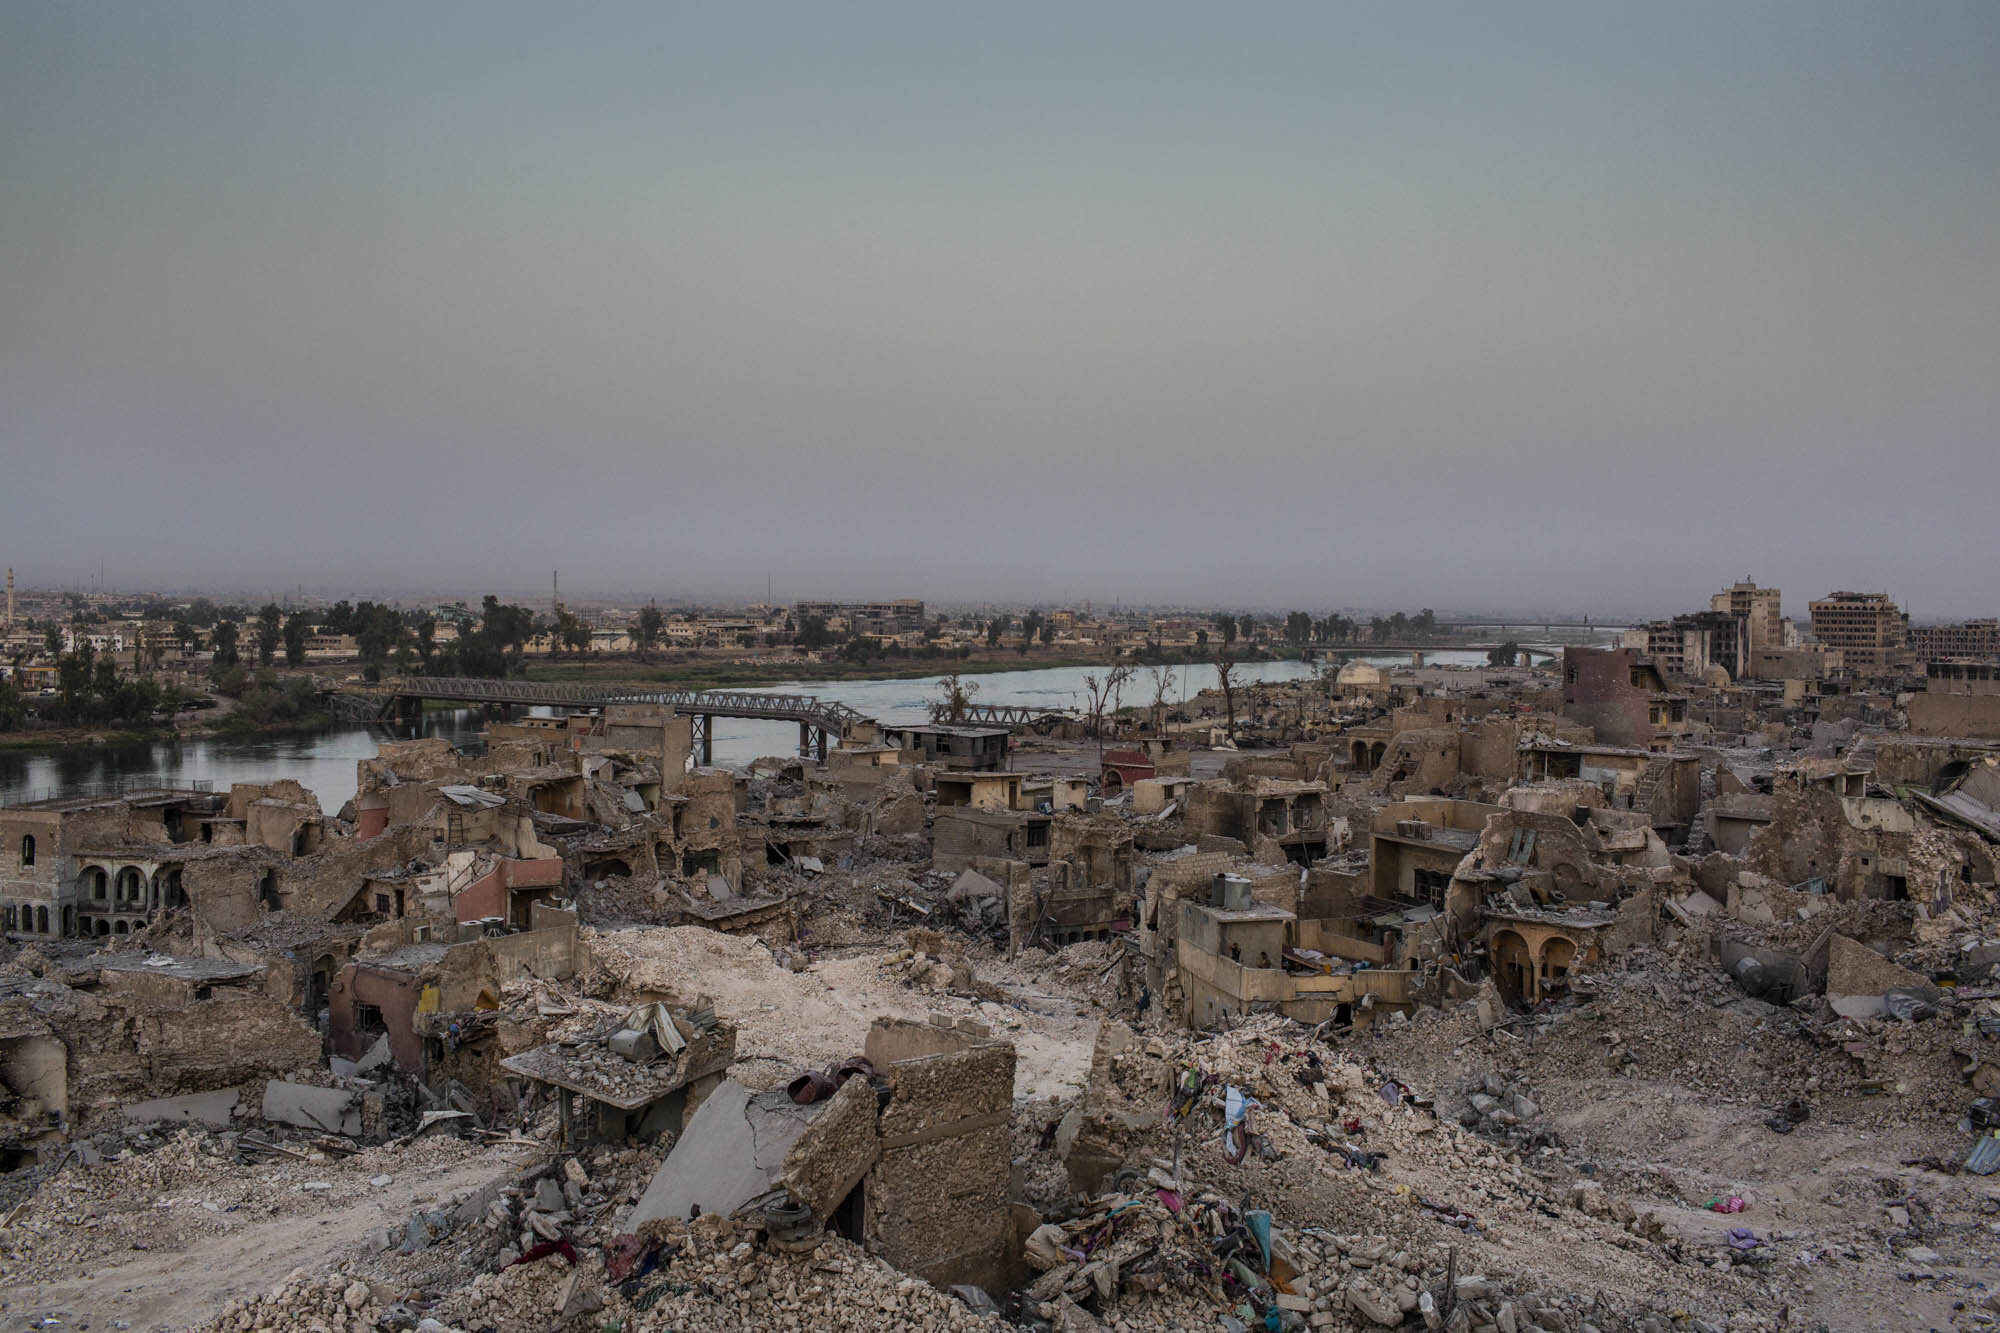  The heavily destroyed Maydan area of Mosul’s Old City, where the last ISIS militants were corralled and eventually killed by Iraqi security forces. Iraq - July 2017 